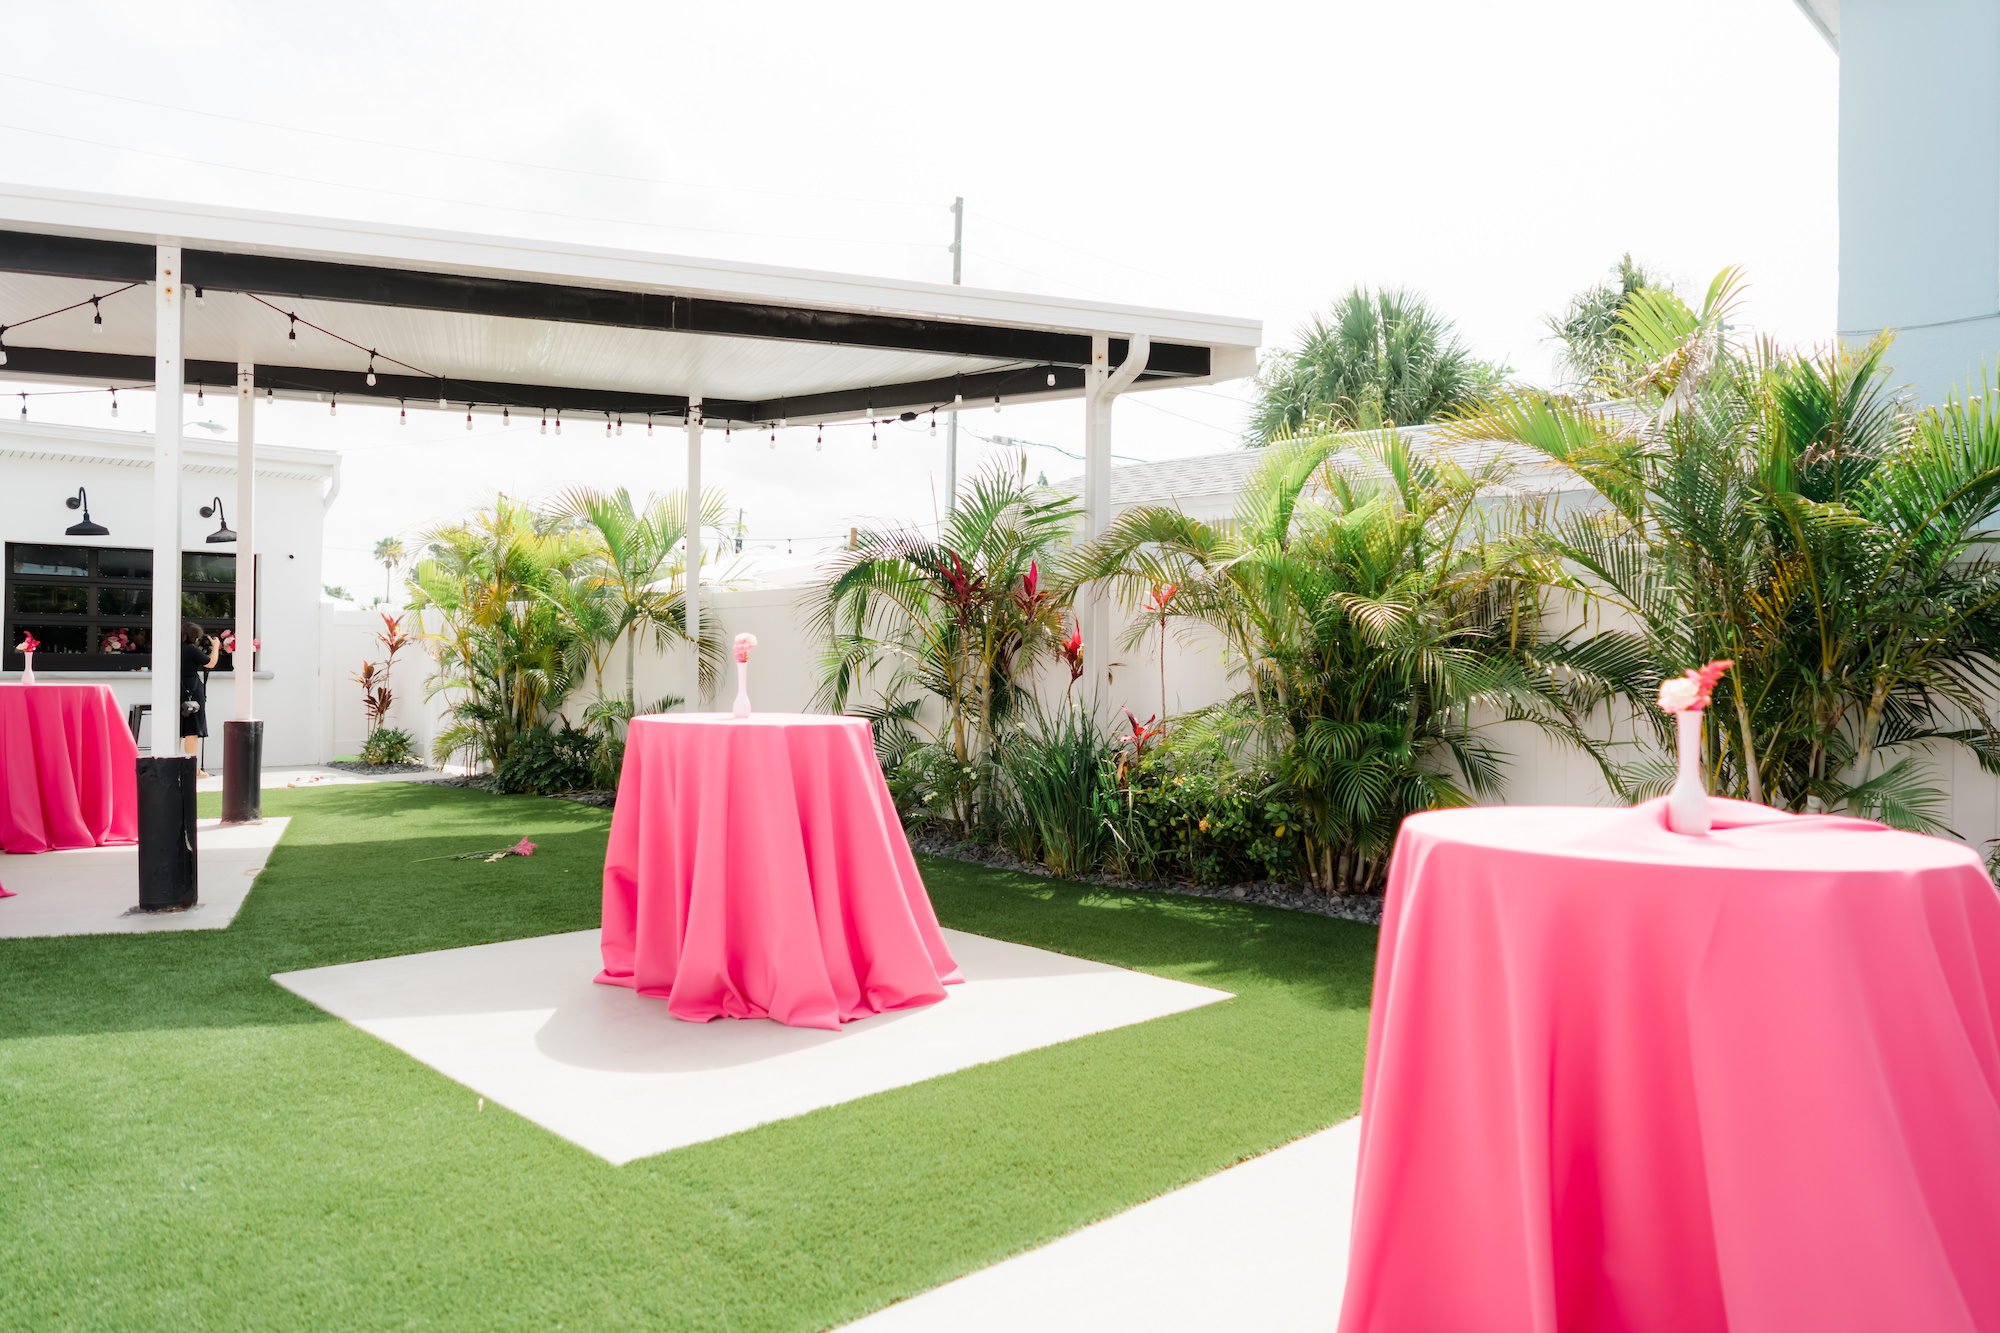 Whimsical Pink and Fuchsia Outdoor Courtyard Wedding Decor, High Cocktail Tables with Pink Linens | Tampa Bay Wedding Venue The West Events